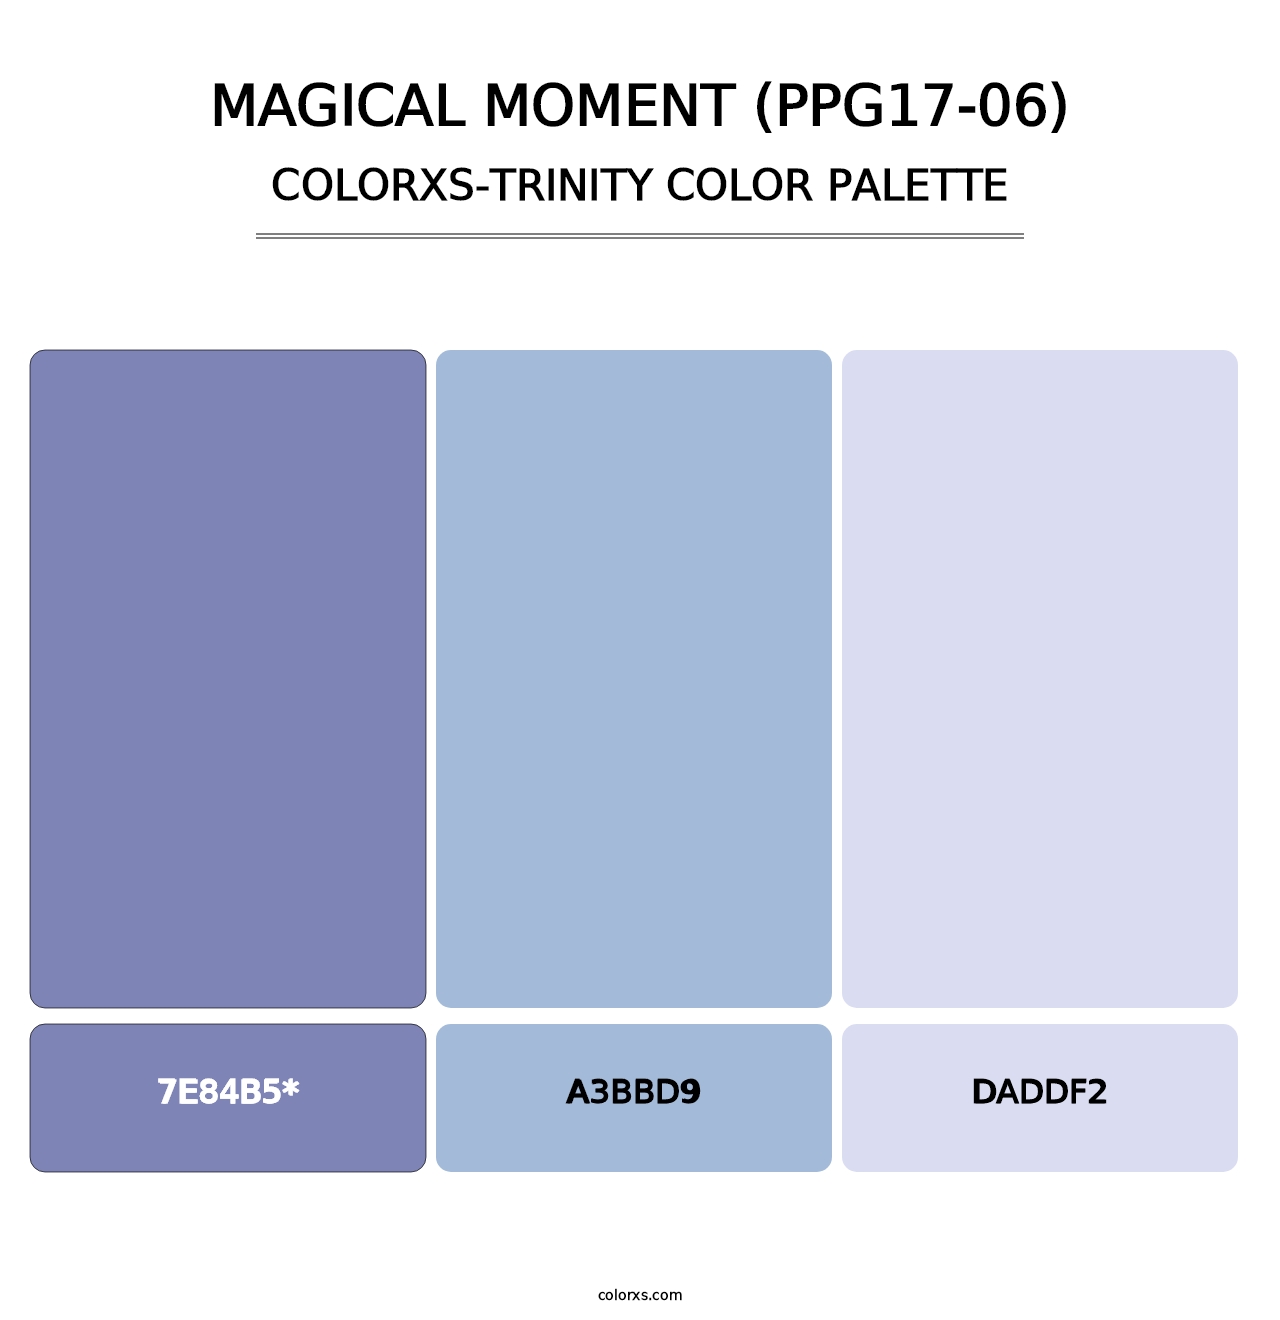 Magical Moment (PPG17-06) - Colorxs Trinity Palette